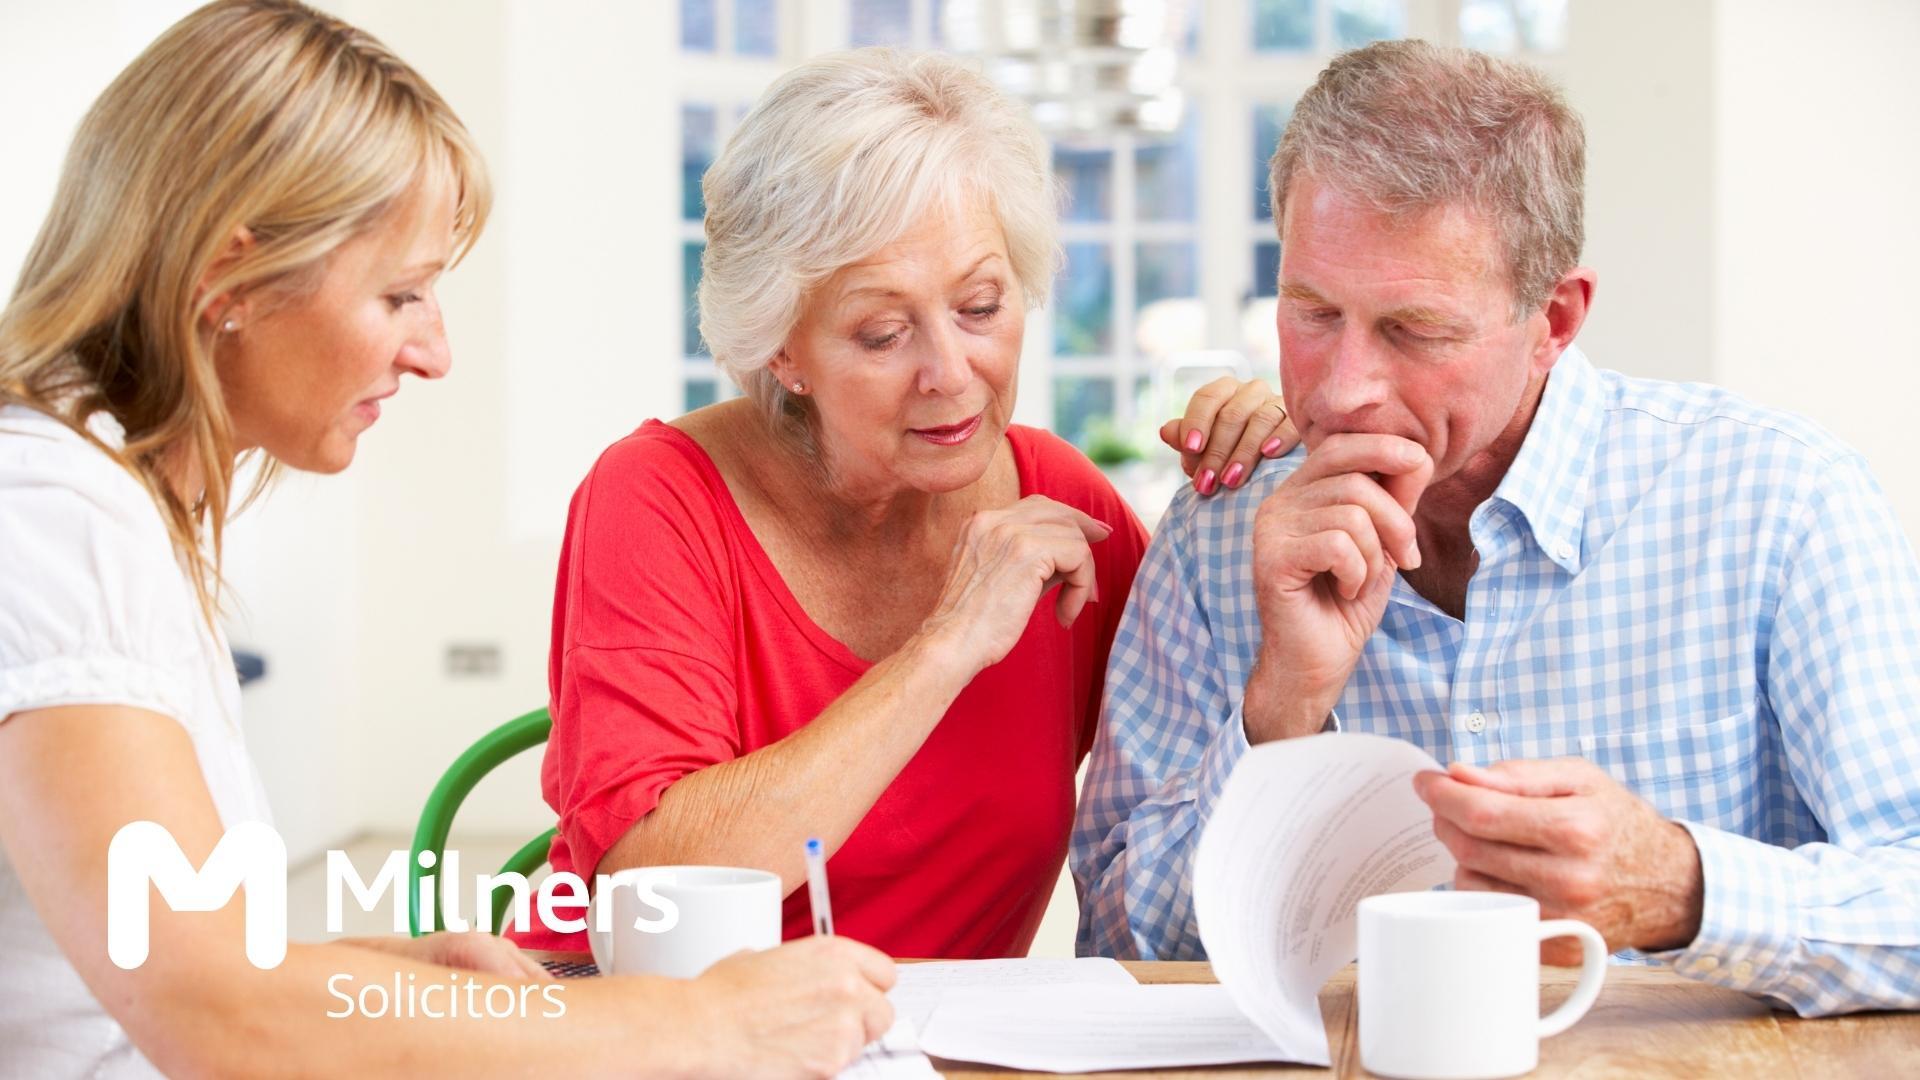 Writing a will makes sure that your loved ones receive the inheritance they deserve. But what happens if you pass away without a will? Read on to find out.